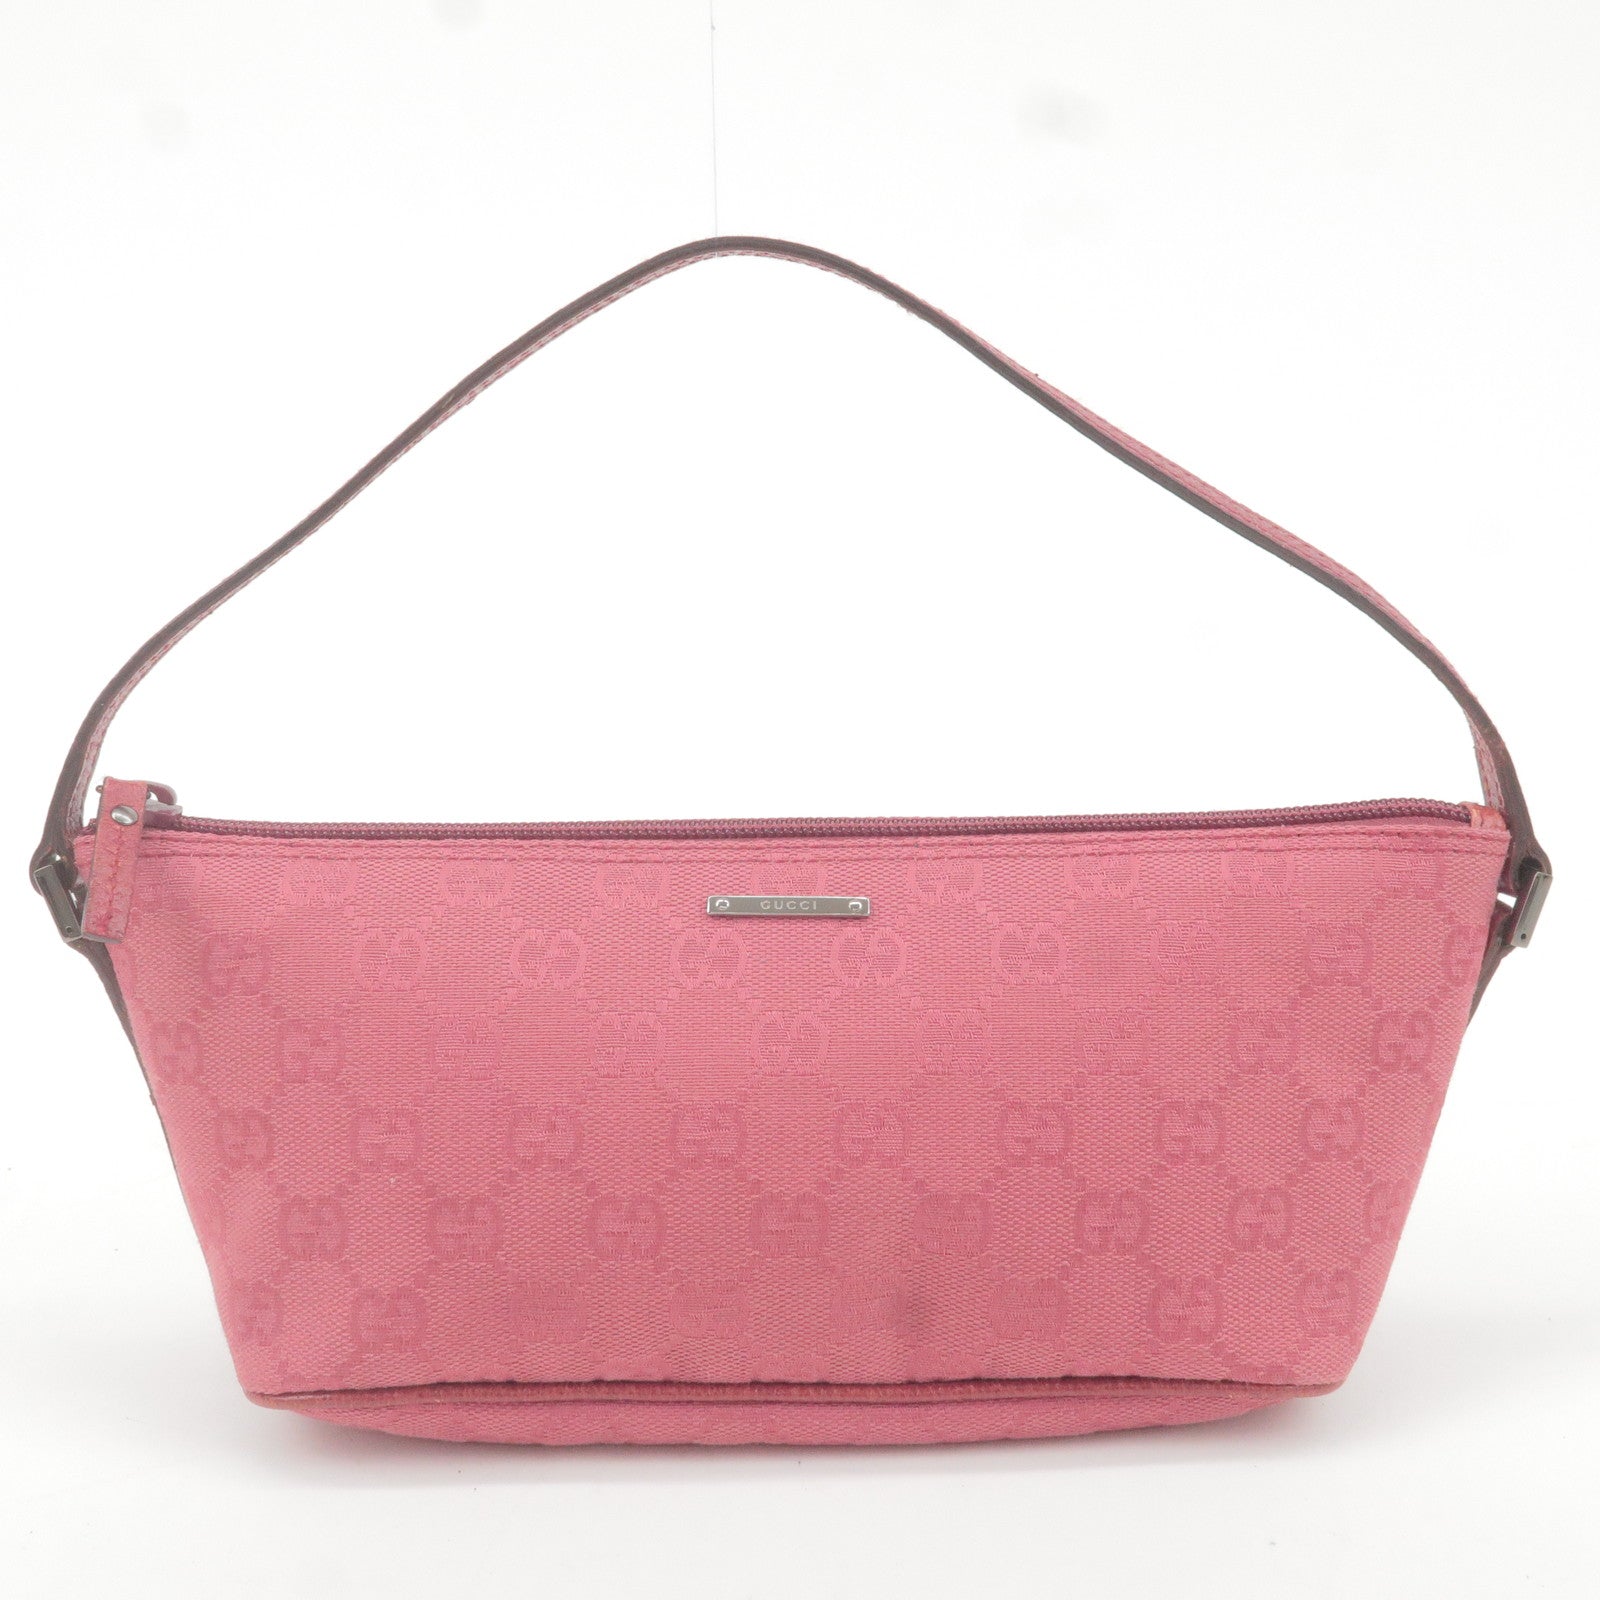 Gucci Attache small shoulder bag in pink GG Crystal canvas